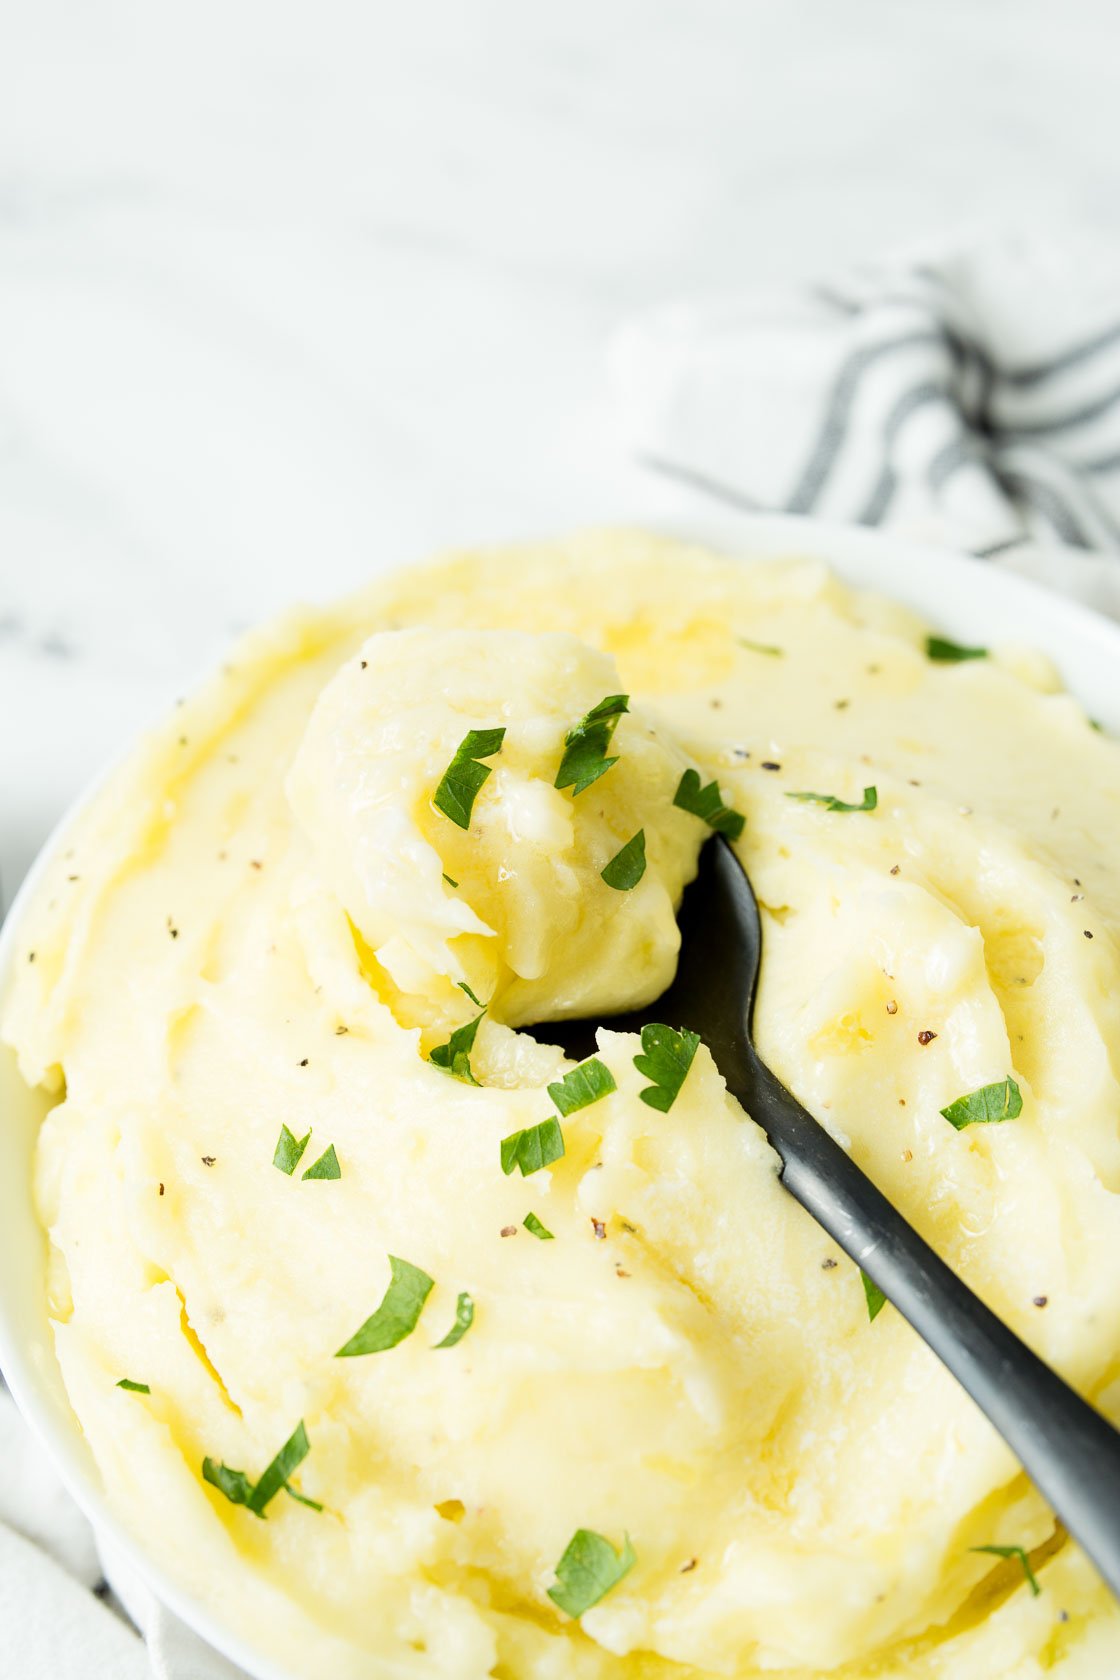 A black spoonful of mashed potatoes with parsley and black pepper